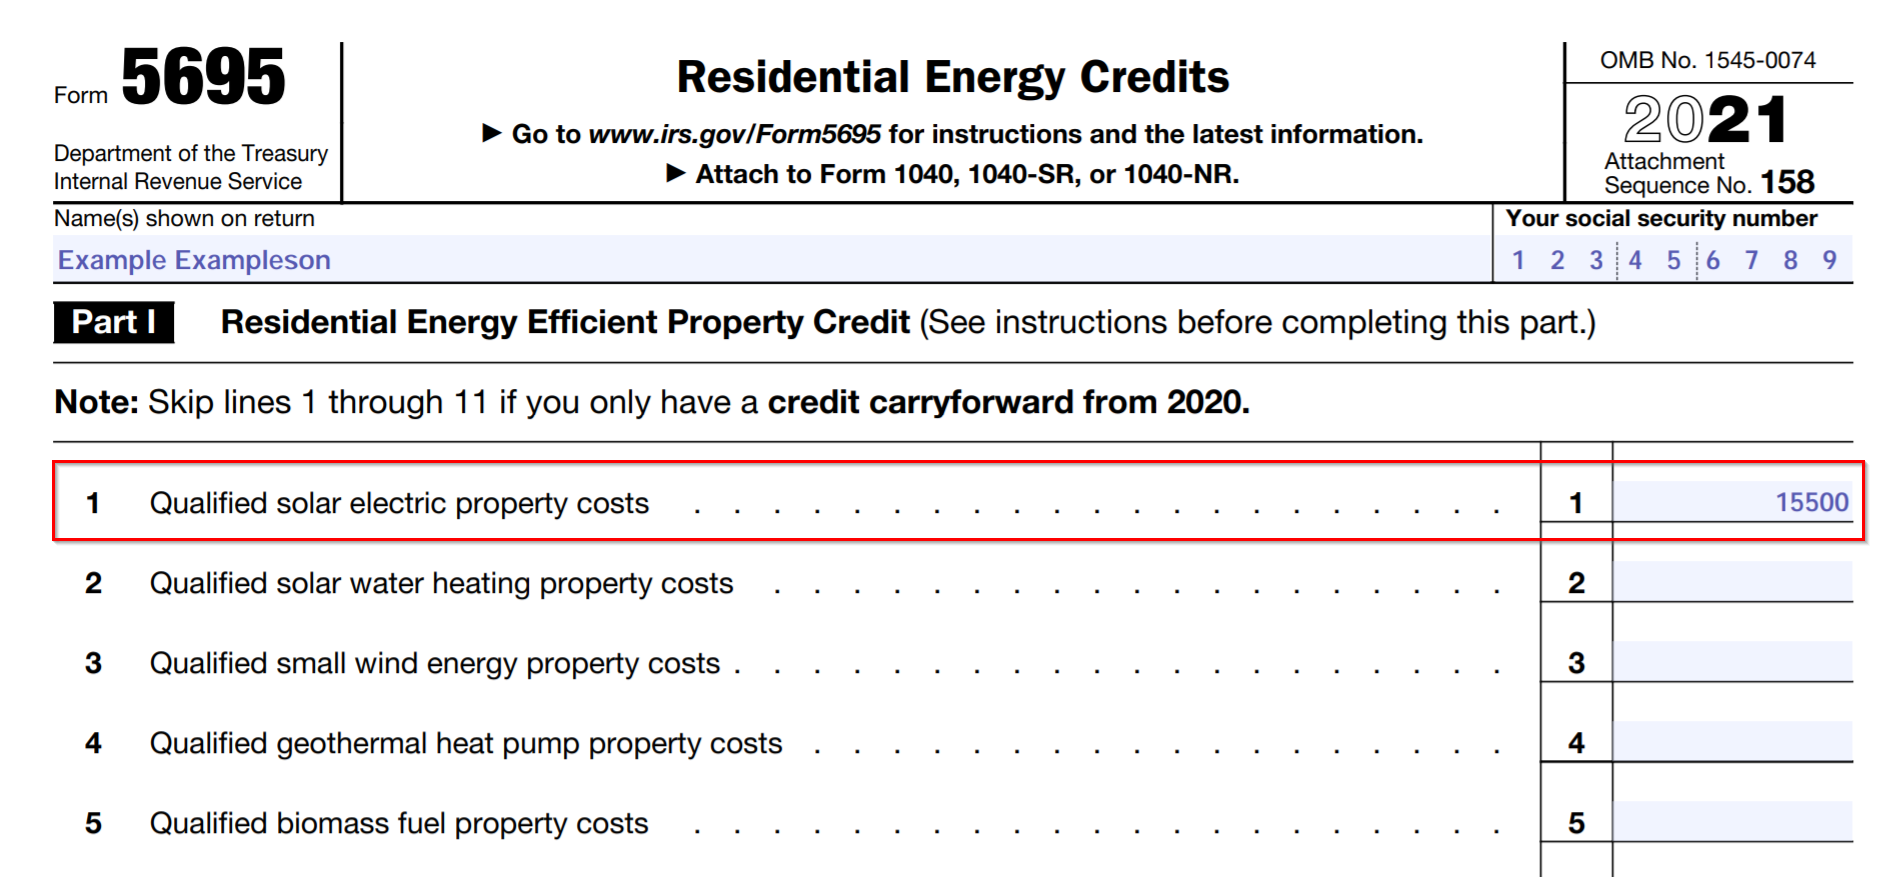 How To Claim The Solar Tax Credit Using IRS Form 5695